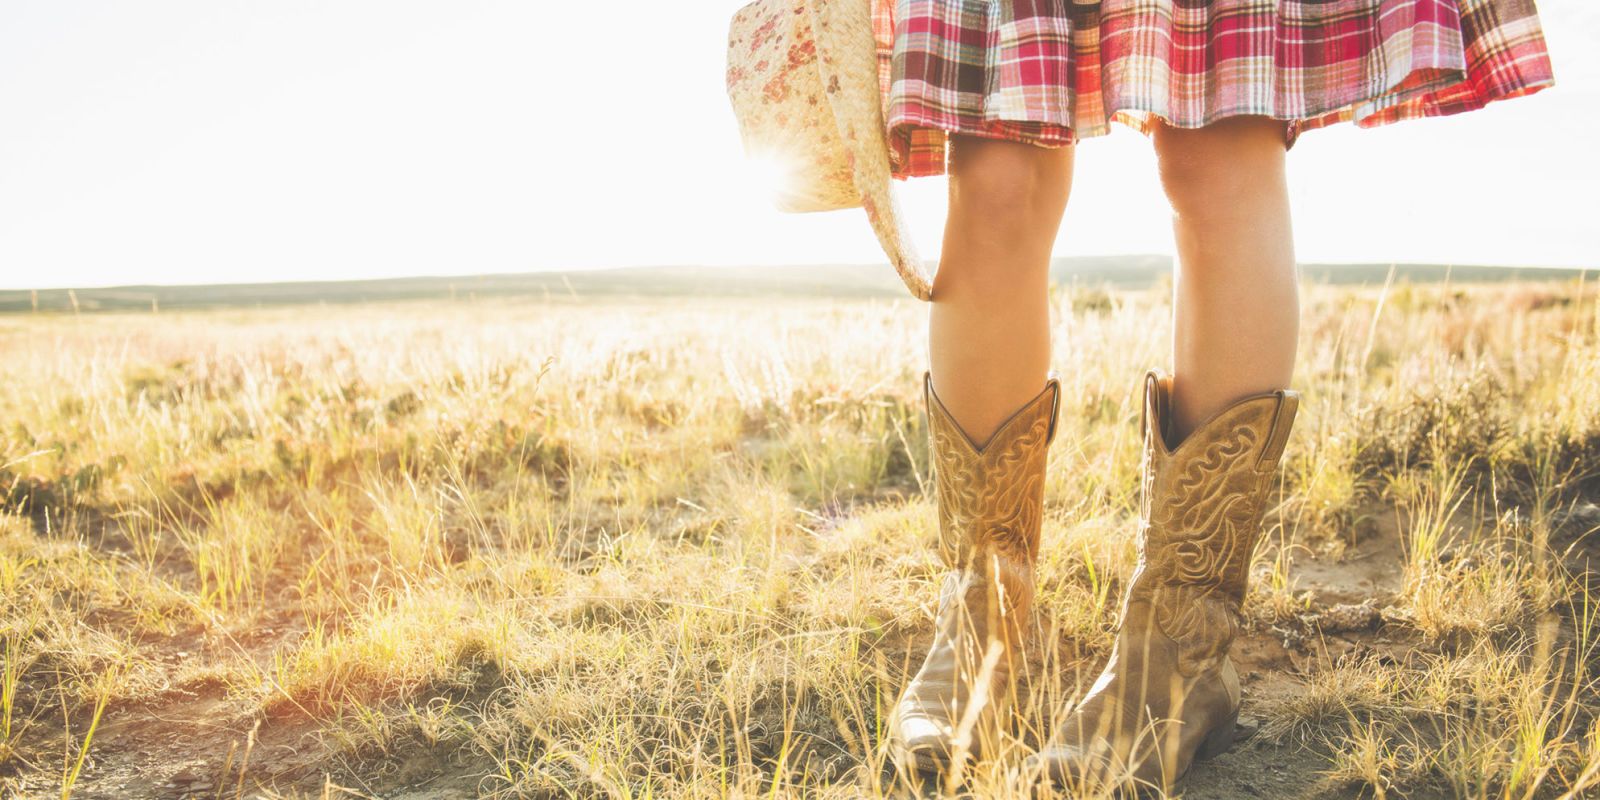 country girl clothing brands